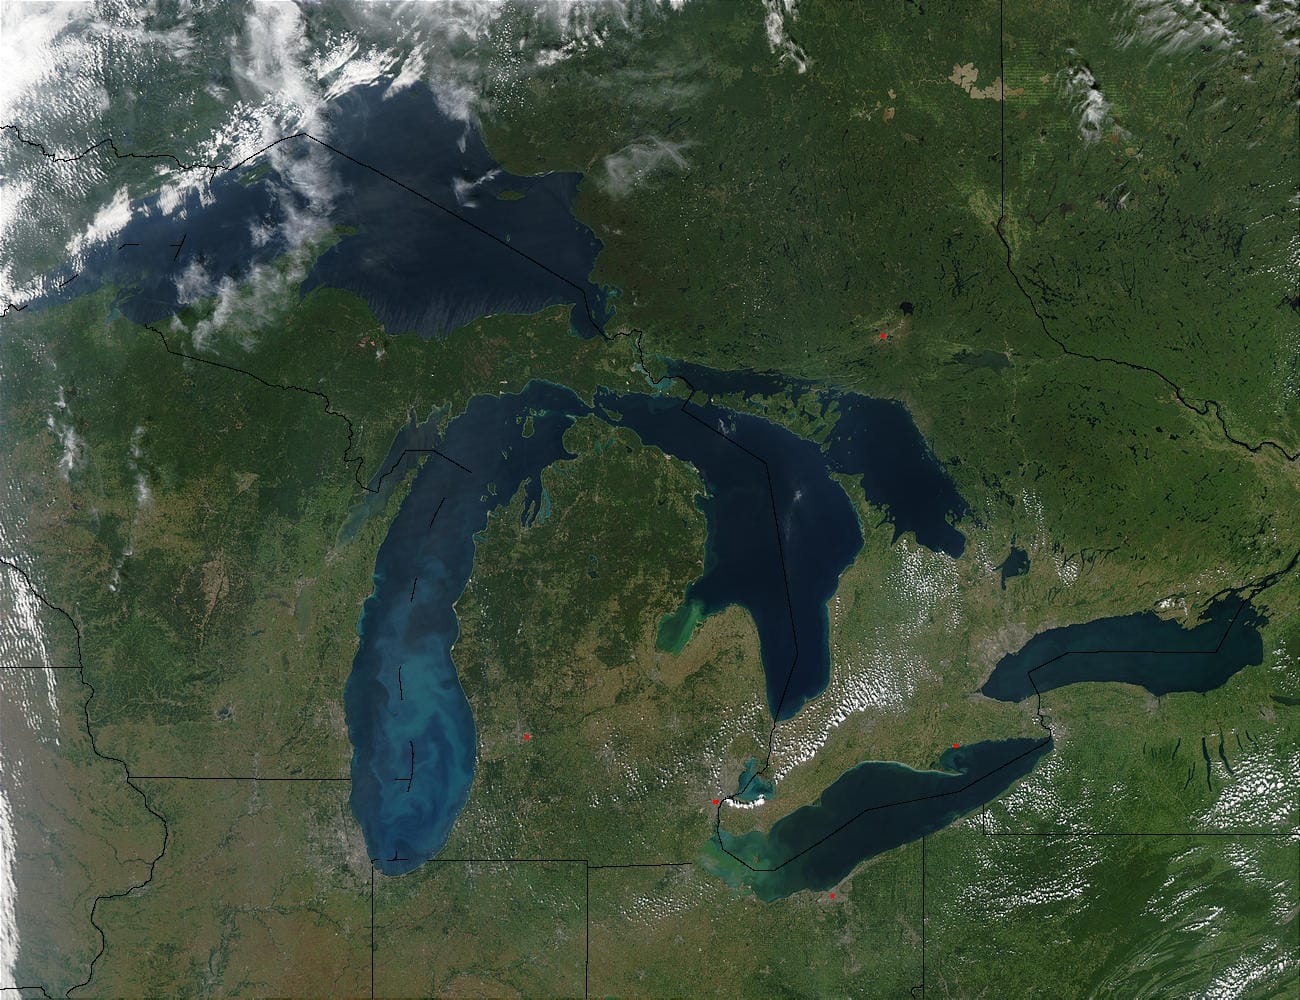 Satellite image of the state of Michigan and the surrounding states. Lake Superior covers the upper left corner. Beneath it is Lake Michigan, and to the right is Lake Huron. Under Lake Huron is Lake Erie (left) and Lake Ontario (right). The pale blue swirls in Lake Michigan are probably caused by a phytoplankton bloom or calcium carbonate (chalk) from the lake's limestone floor. Concrete-grey patches mark the locations of several cities throughout the Great Lakes region. Red dots indicate active fire locations.